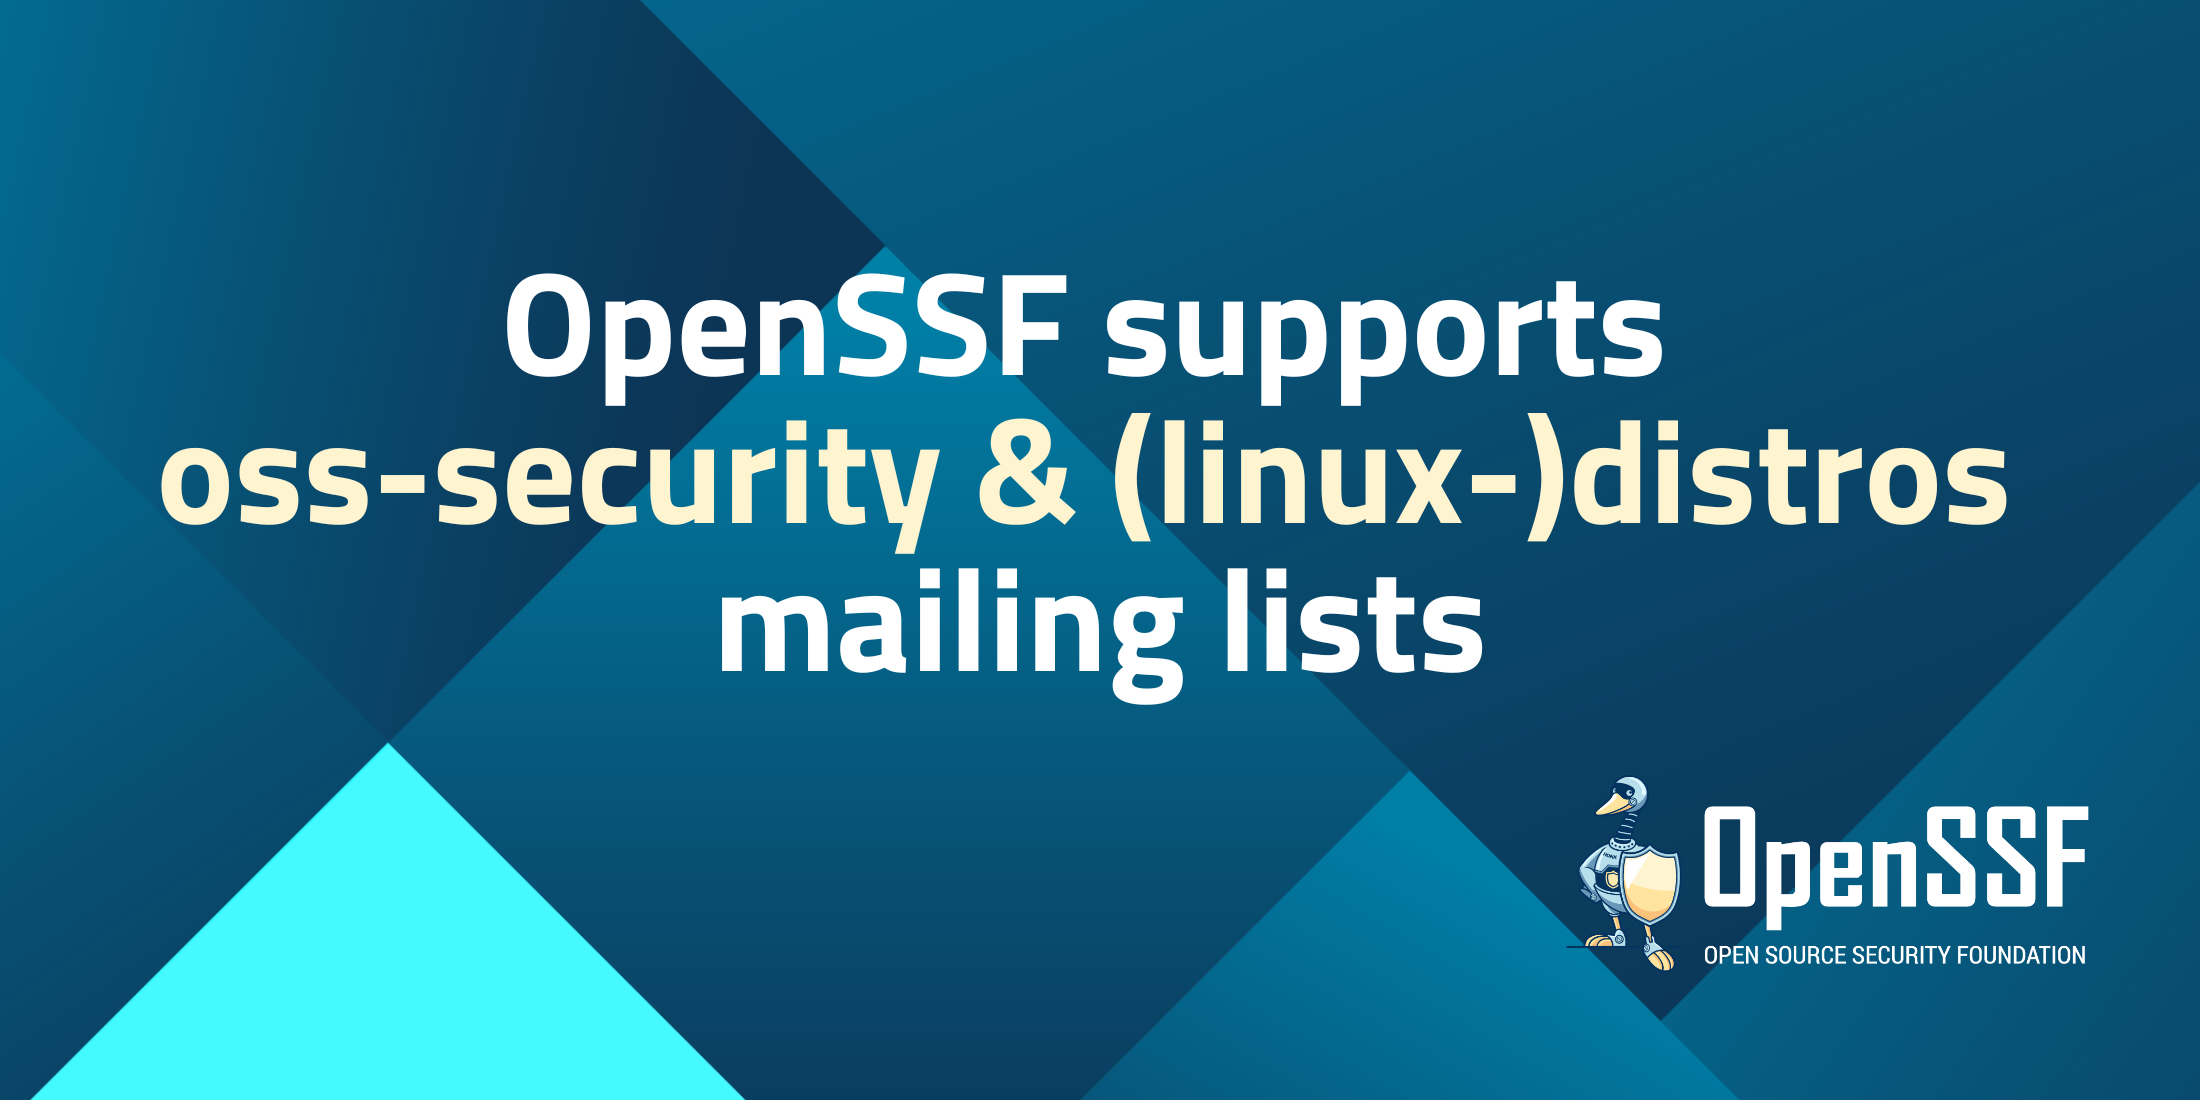 OpenSSF supports oss-security and linux-distros mailing lists